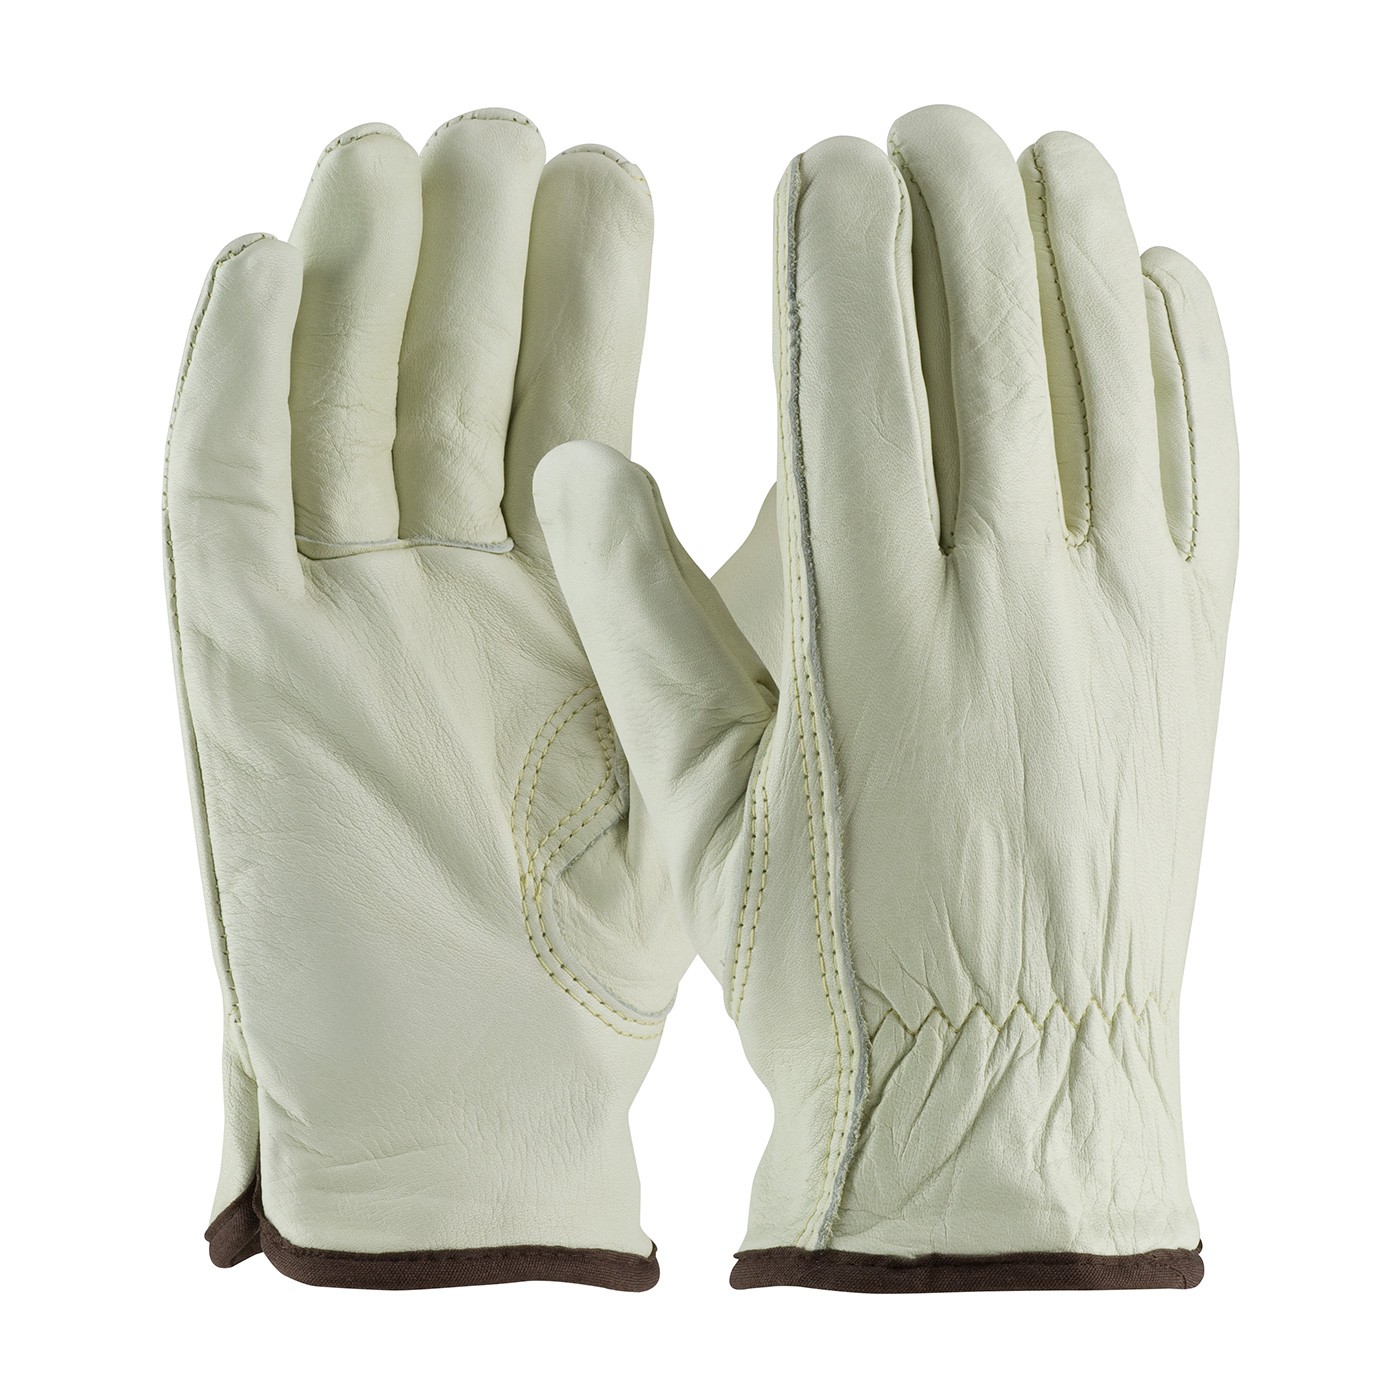 PIP® Top Grain Cowhide Leather Glove with White Thermal Lining - Keystone Thumb  (#77-265)